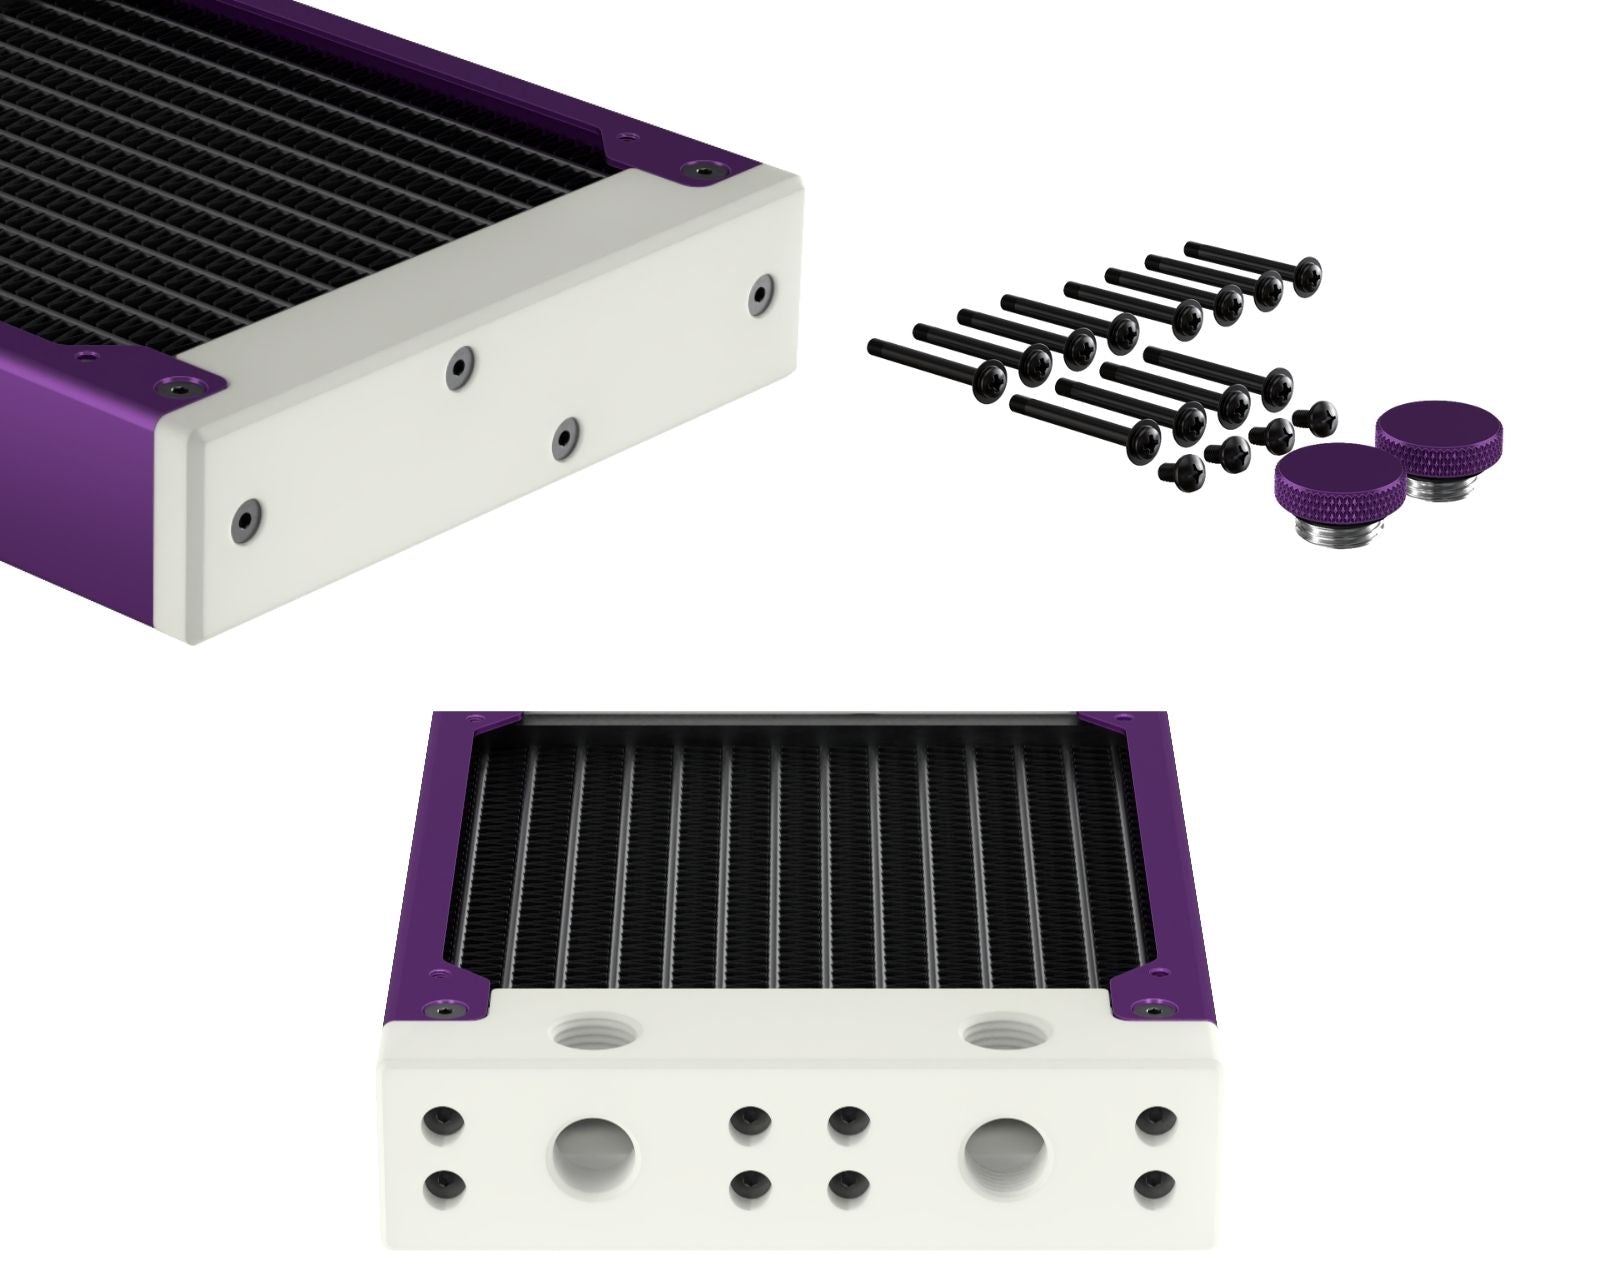 PrimoChill 360SL (30mm) EXIMO Modular Radiator, White POM, 3x120mm, Triple Fan (R-SL-W36) Available in 20+ Colors, Assembled in USA and Custom Watercooling Loop Ready - Candy Purple